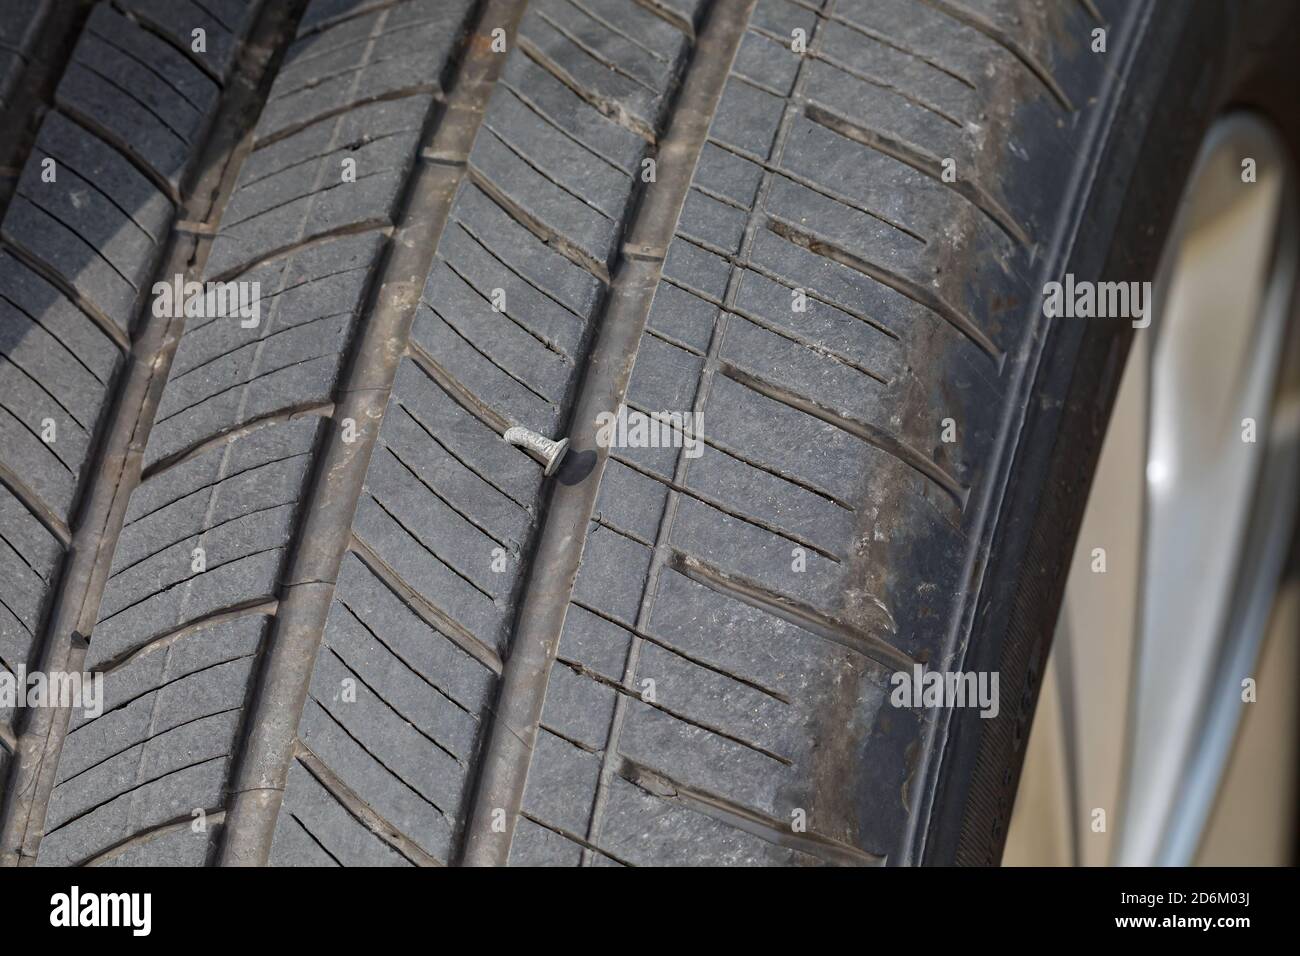 Nail in car tire. Concept of vehicle safety, flat tire, tire maintenance, repair and air pressure Stock Photo